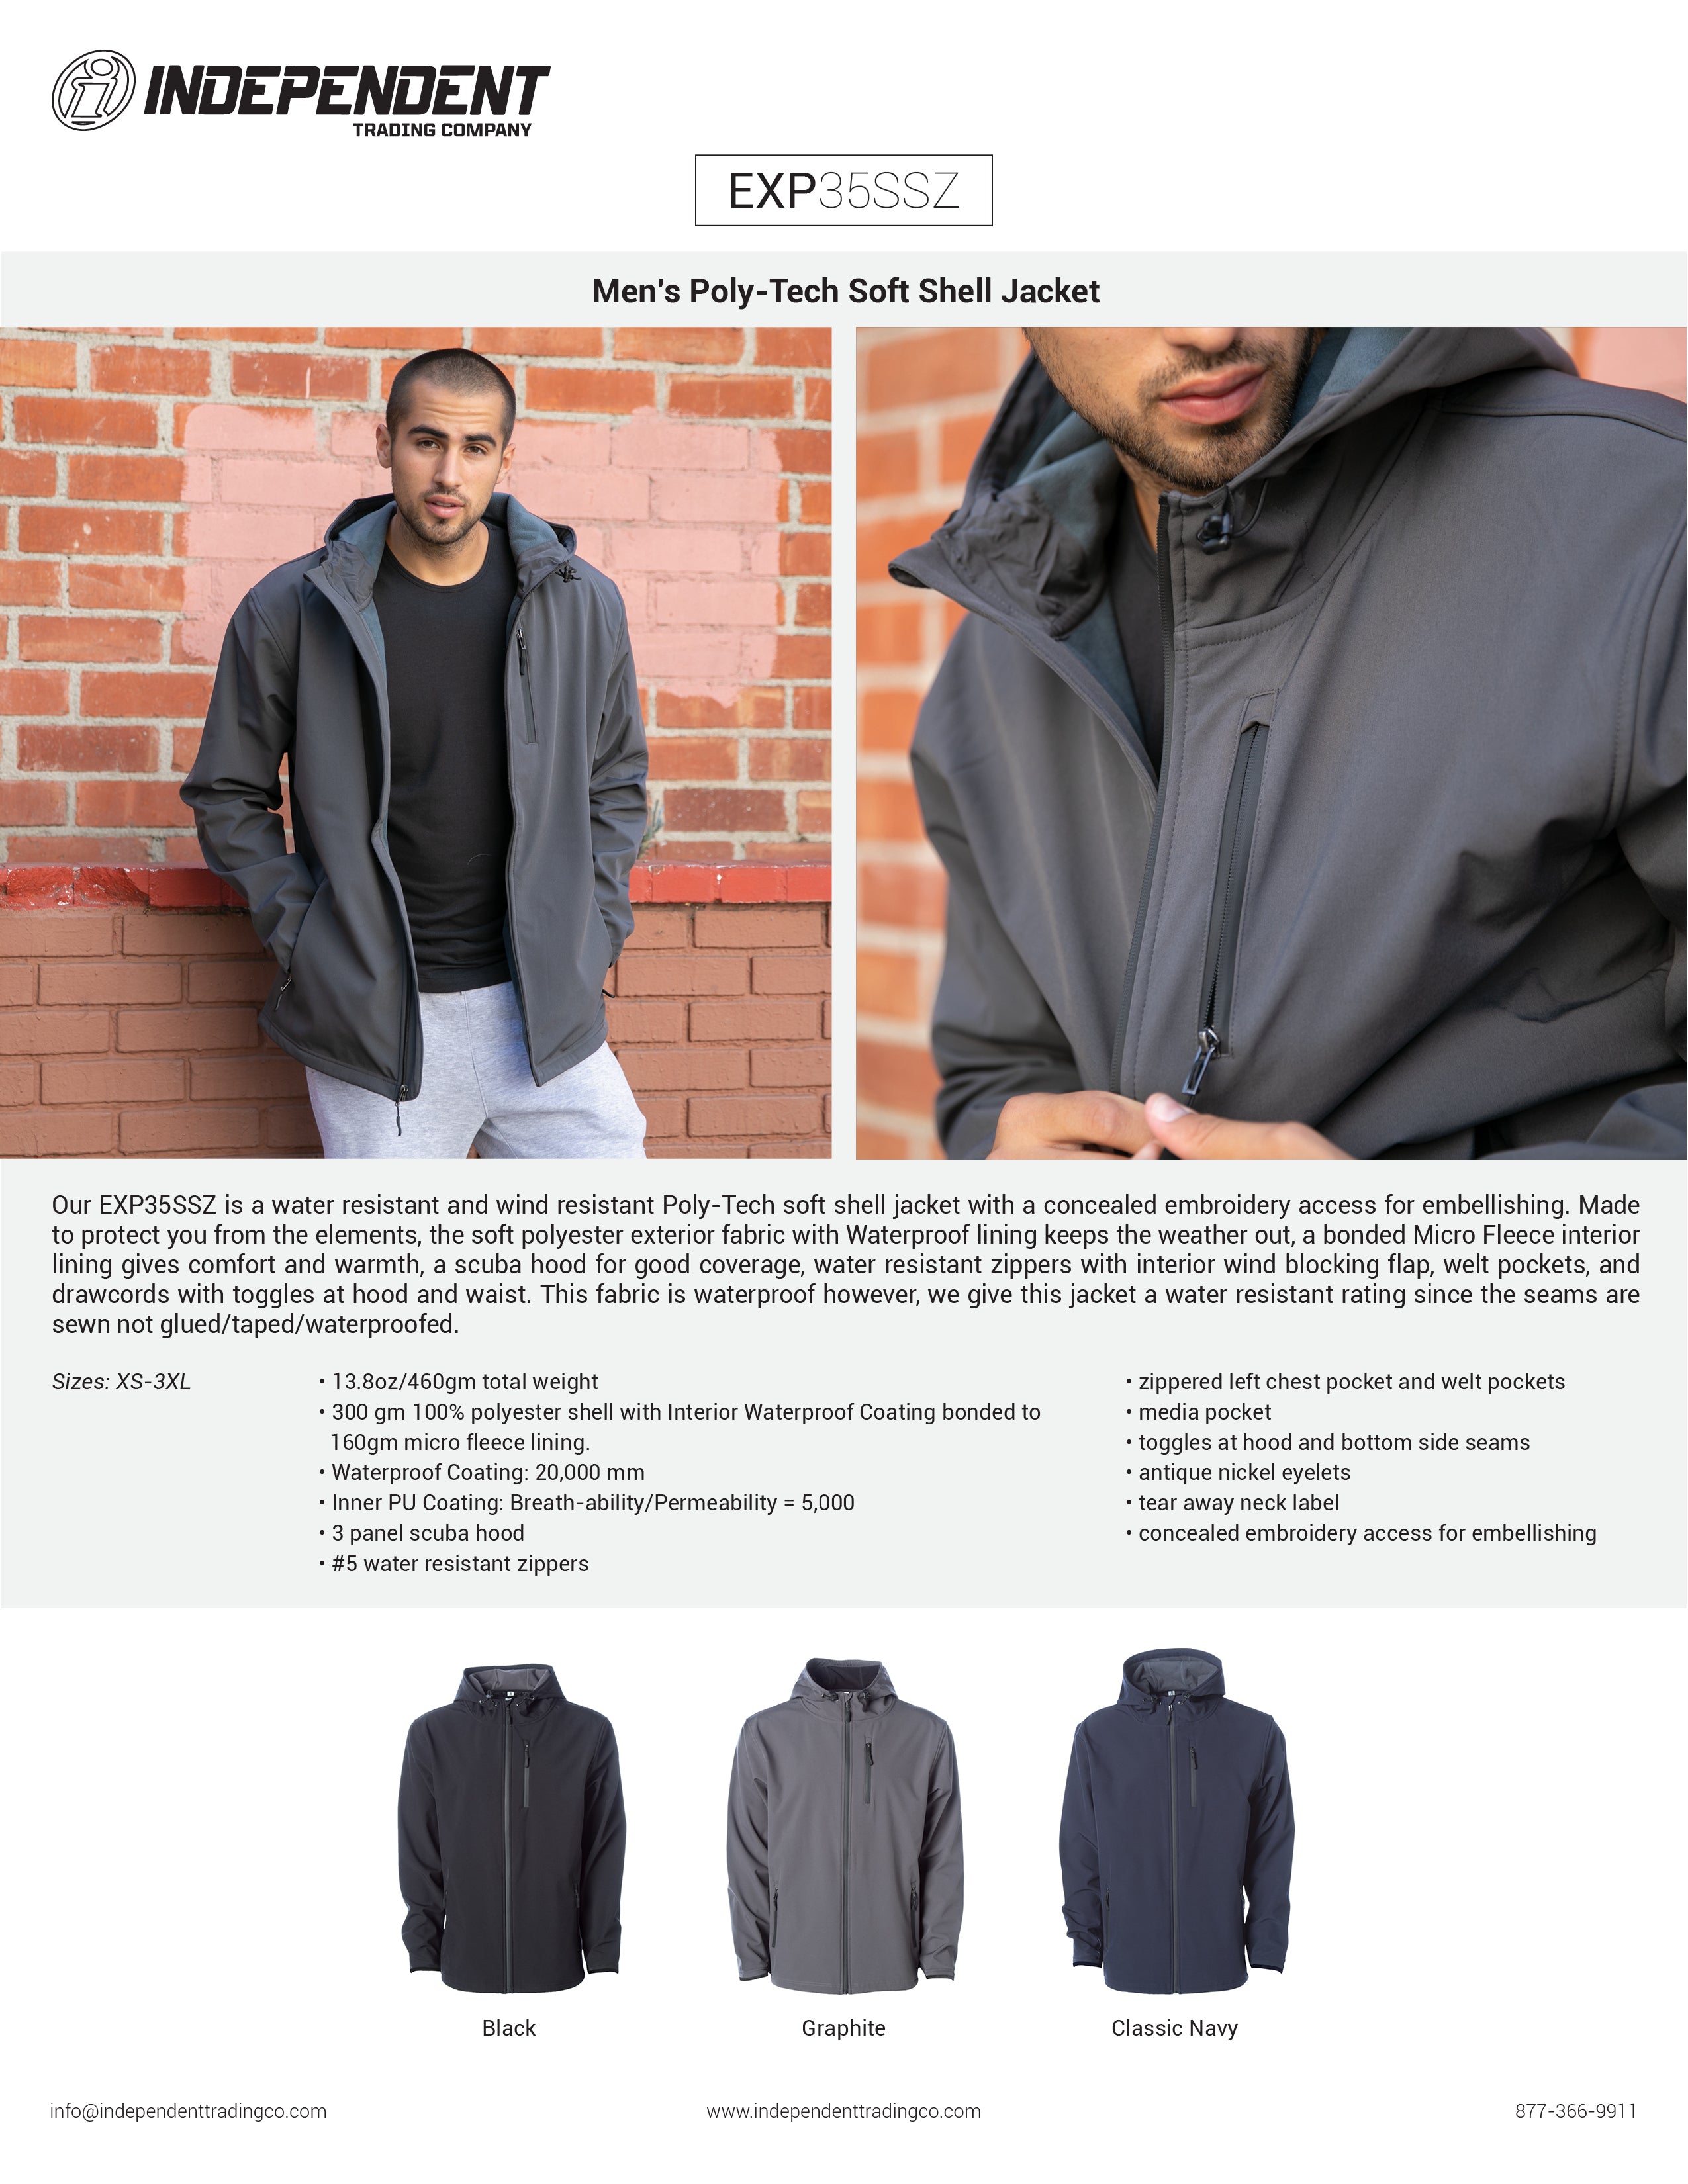 EXP35SSZ Poly-Tech Water Resistant Soft Shell Jacket